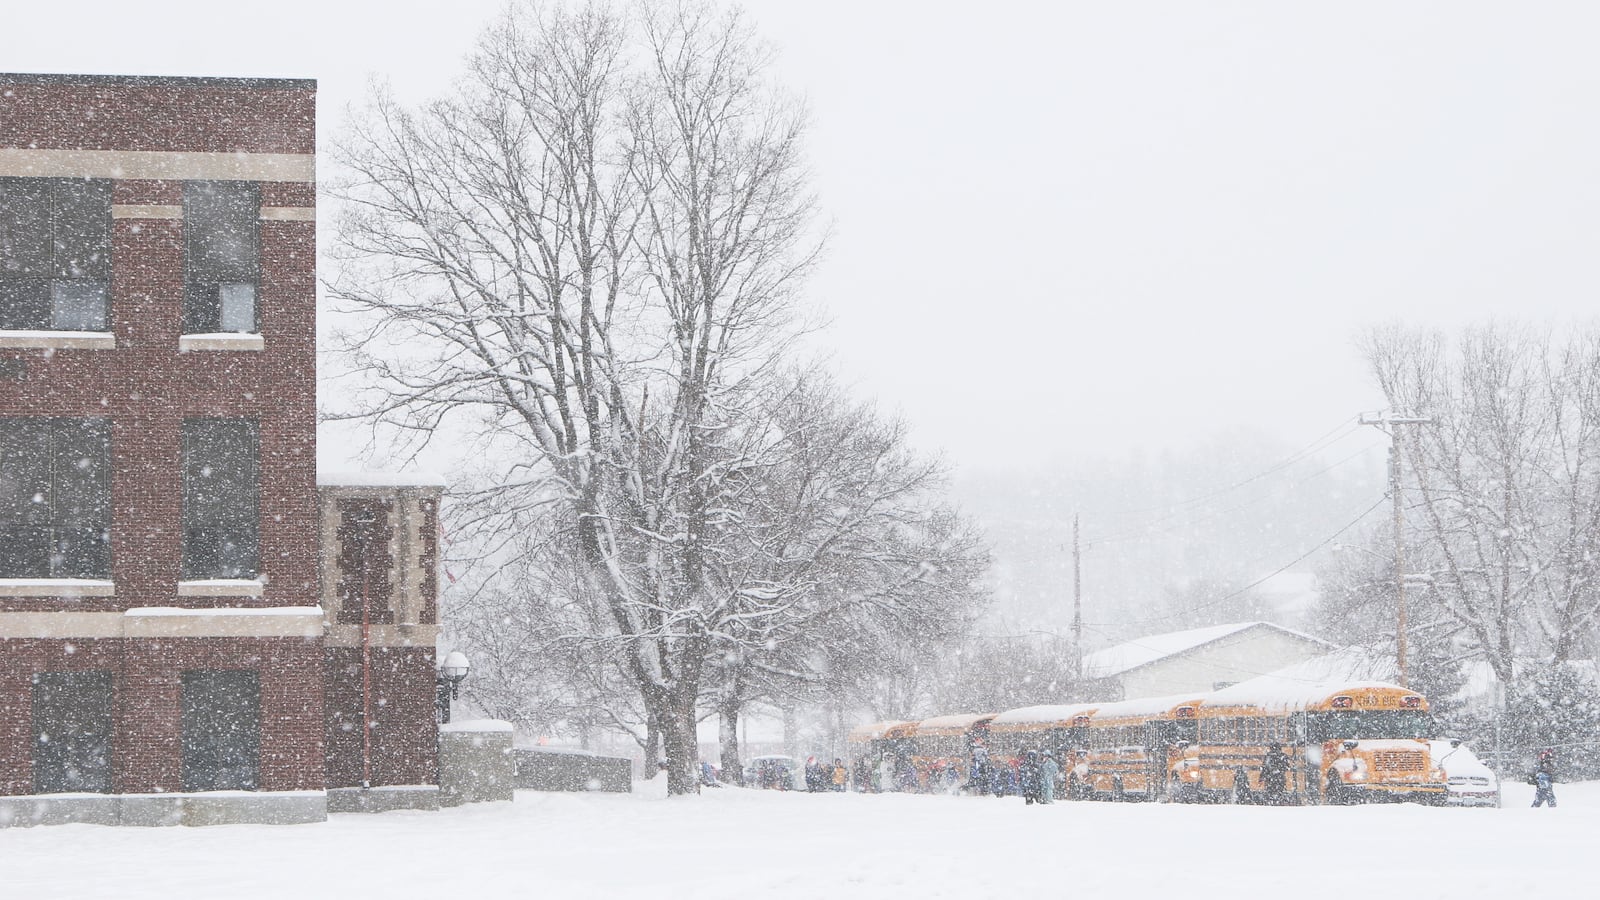 Yellow school buses line up outside a school as snow falls.